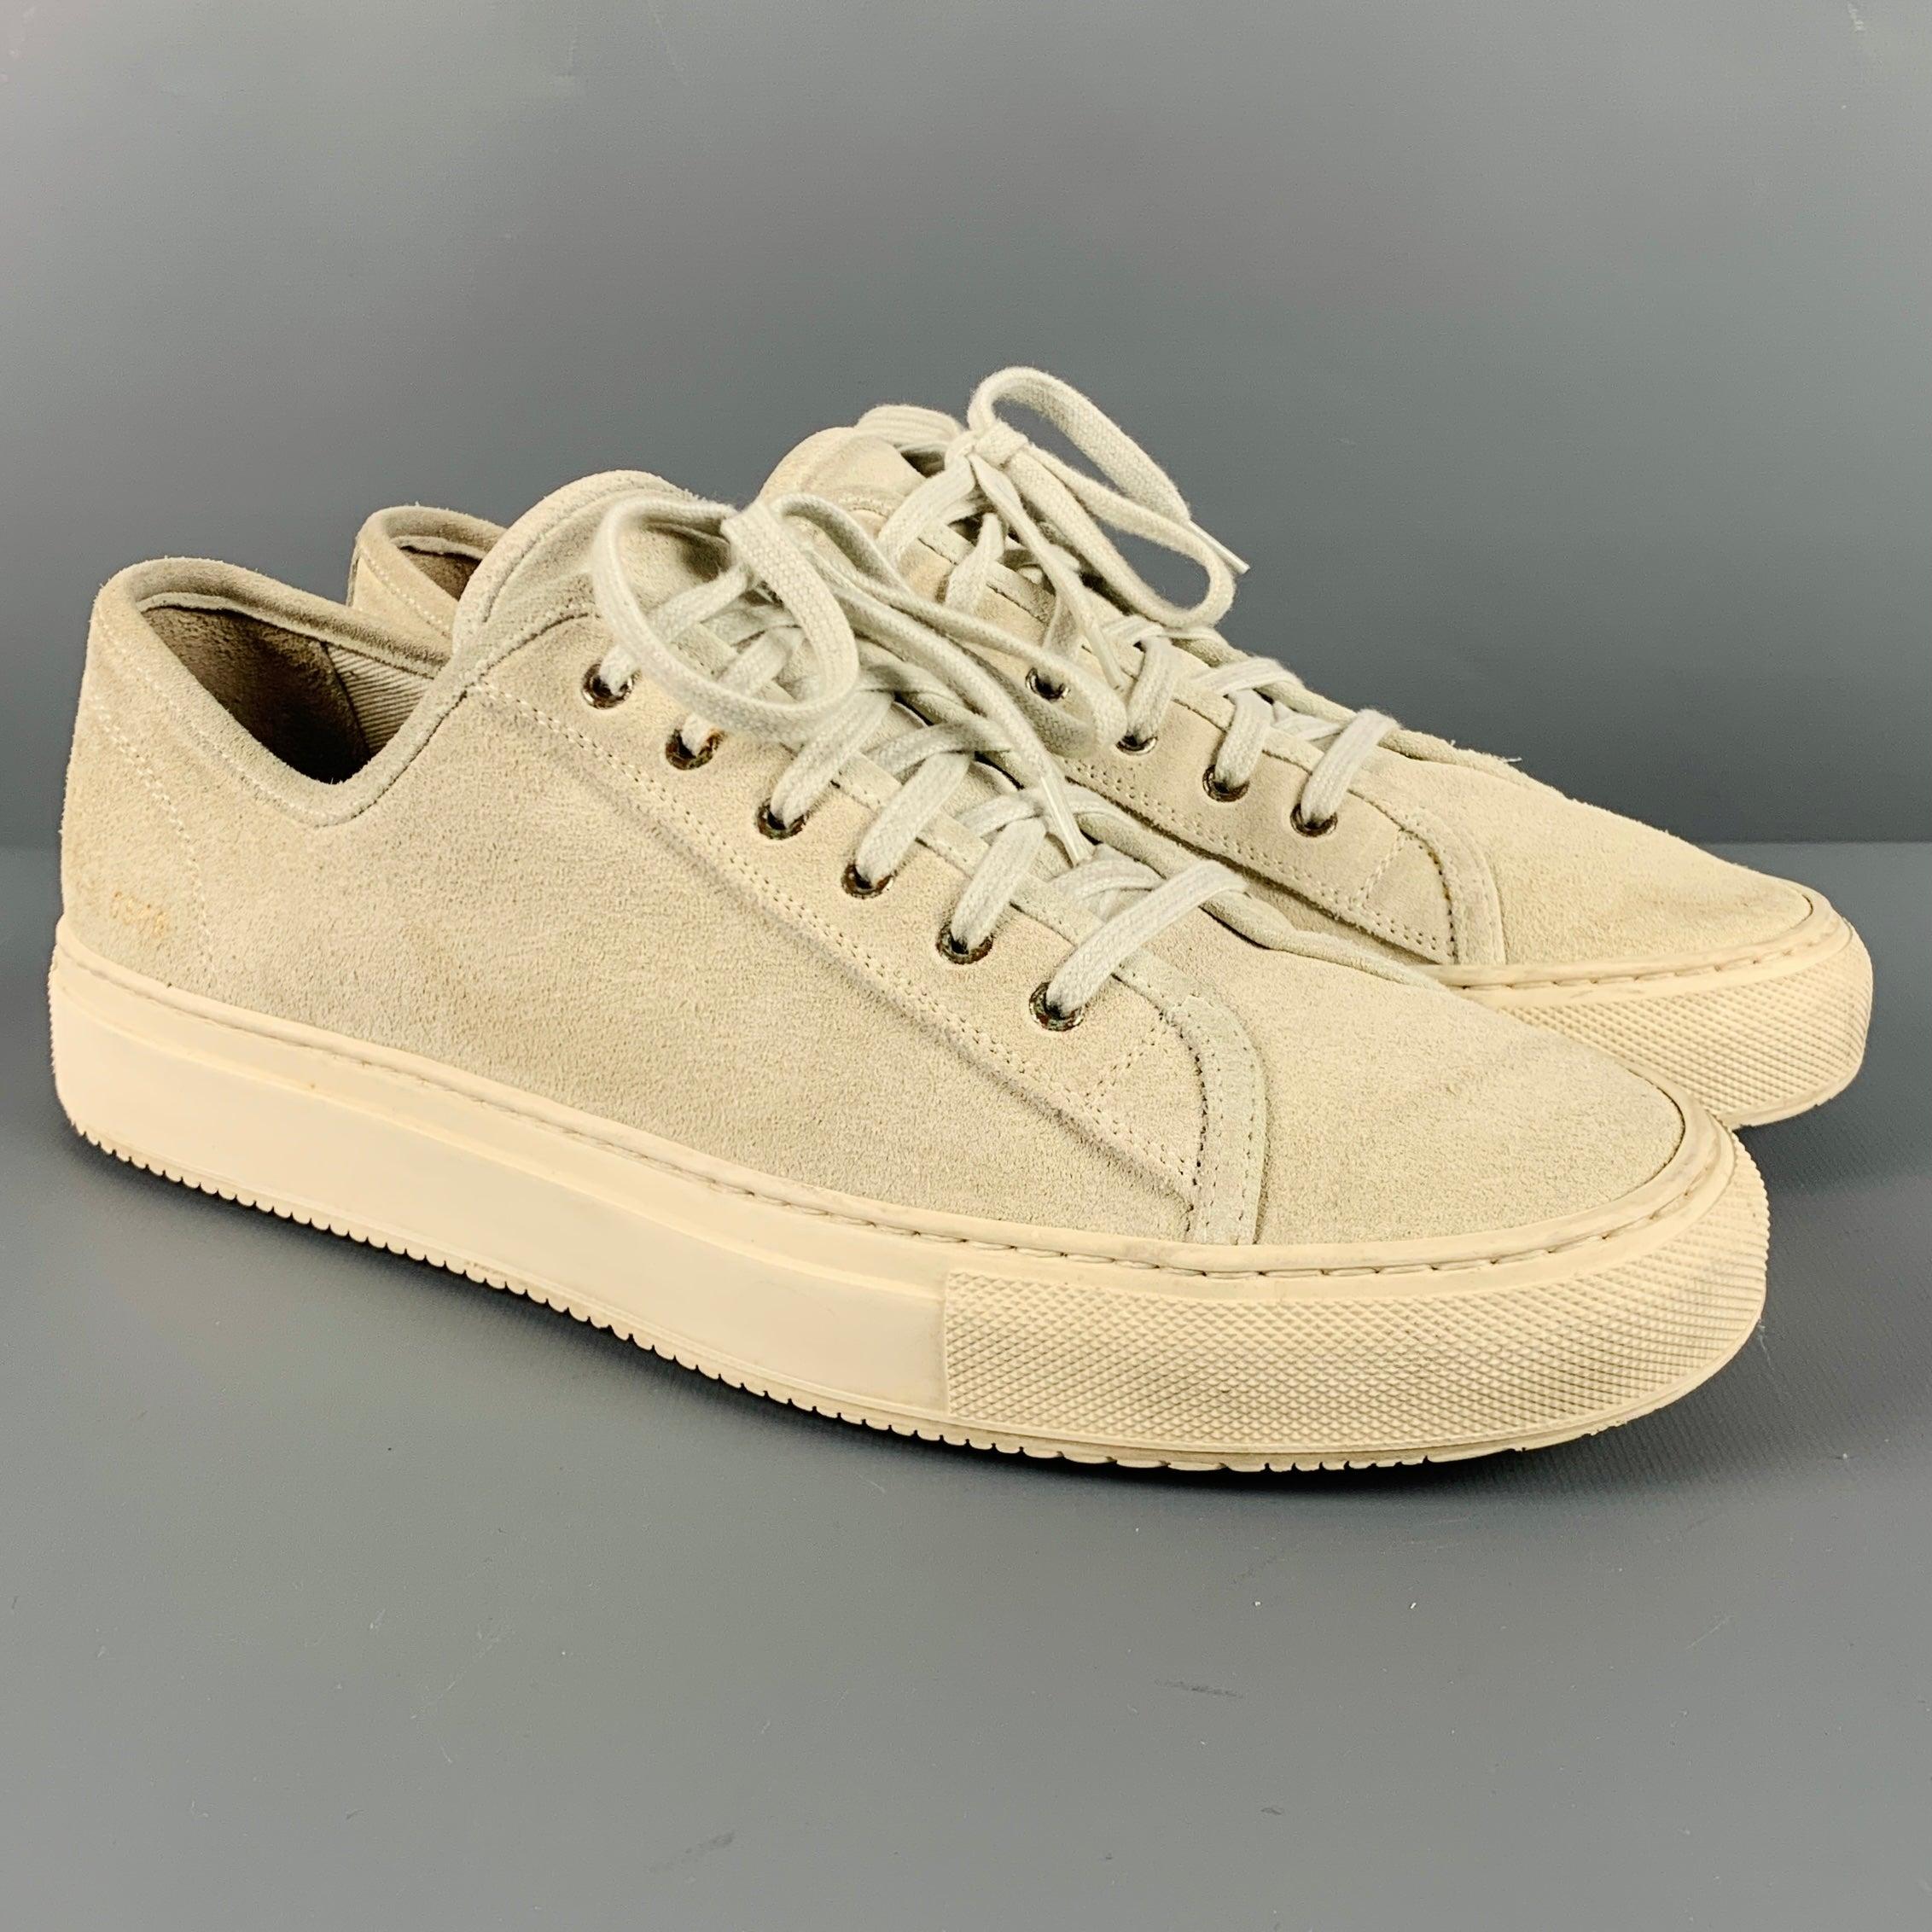 COMMON PROJECTS sneakers
in a natural colored suede fabric featuring a low top style and lace-up closure. Made in Italy.Good Pre-Owned Condition. Moderate signs of wear. 

Marked:   US 10Outsole: 11.5 x 4 inches 
  
  
 
Reference No.: